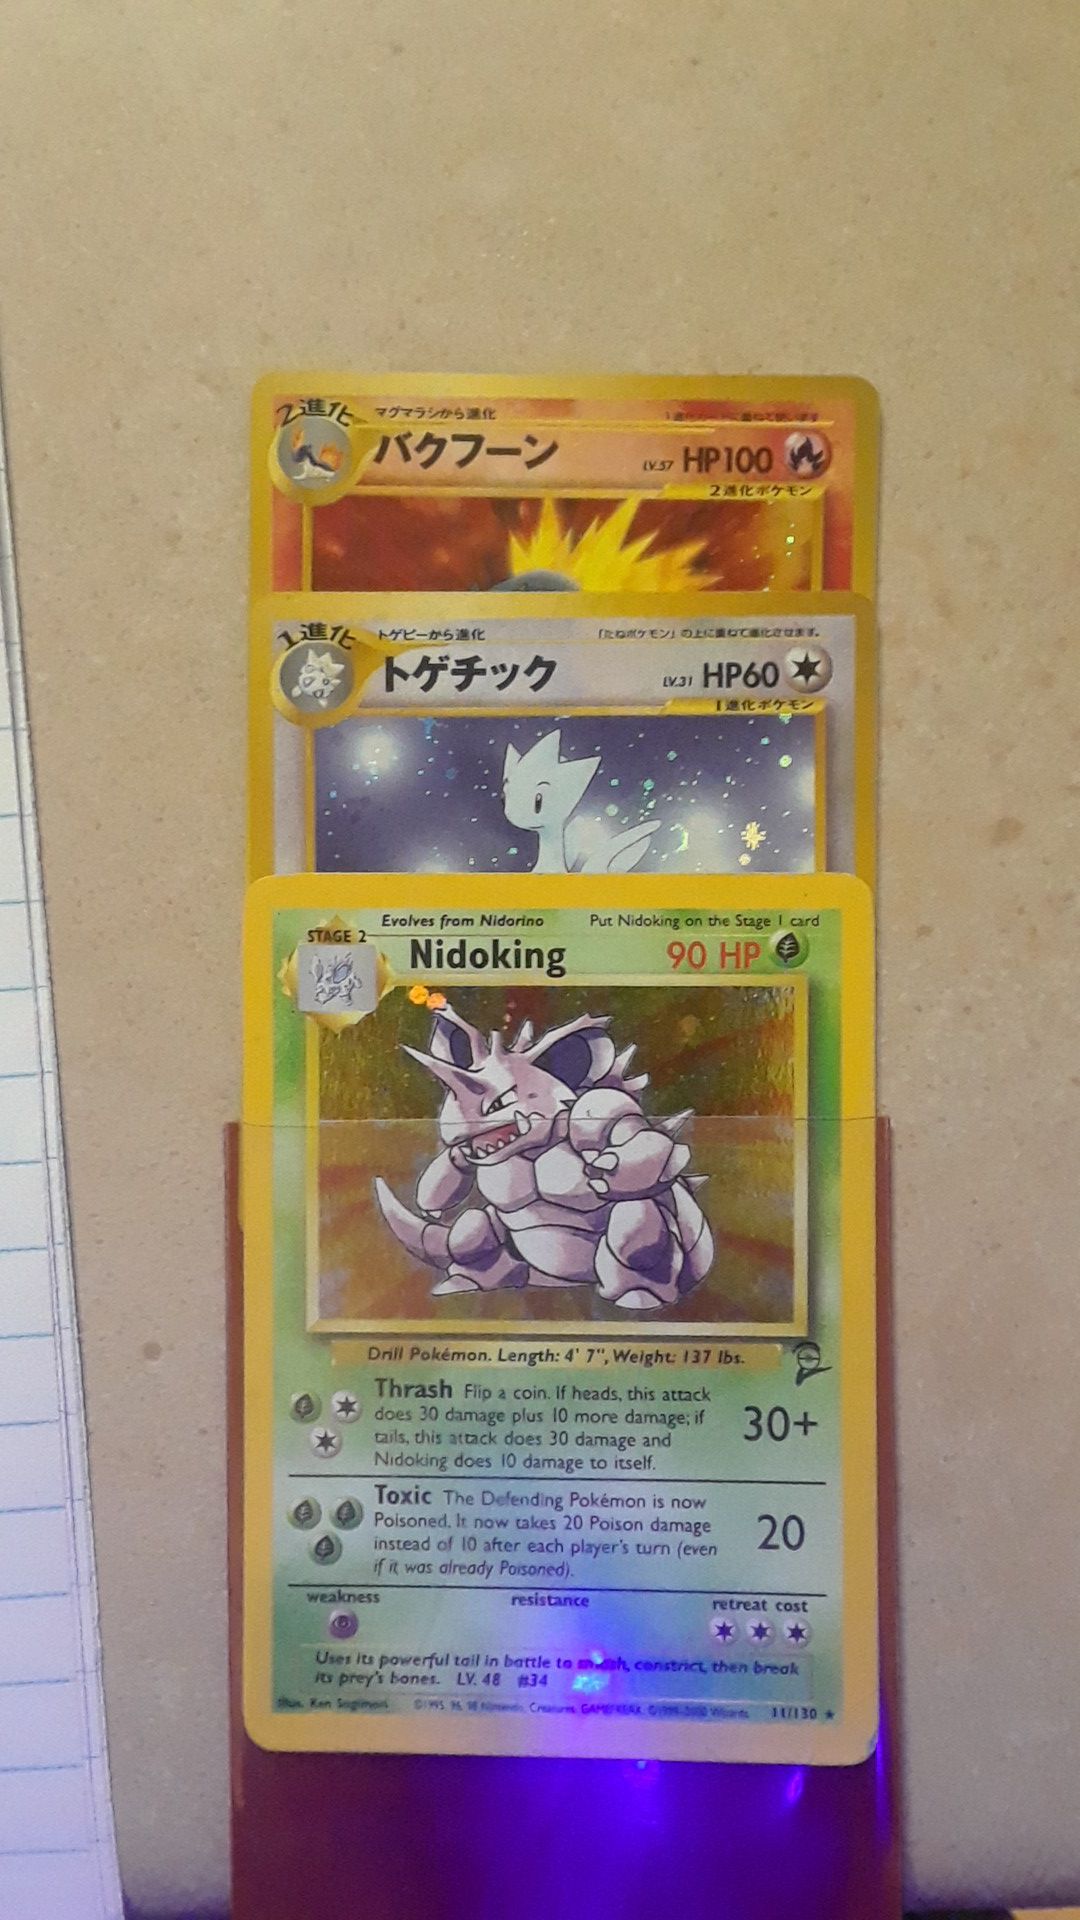 1st edition pokemon cards......3 for 1 deal